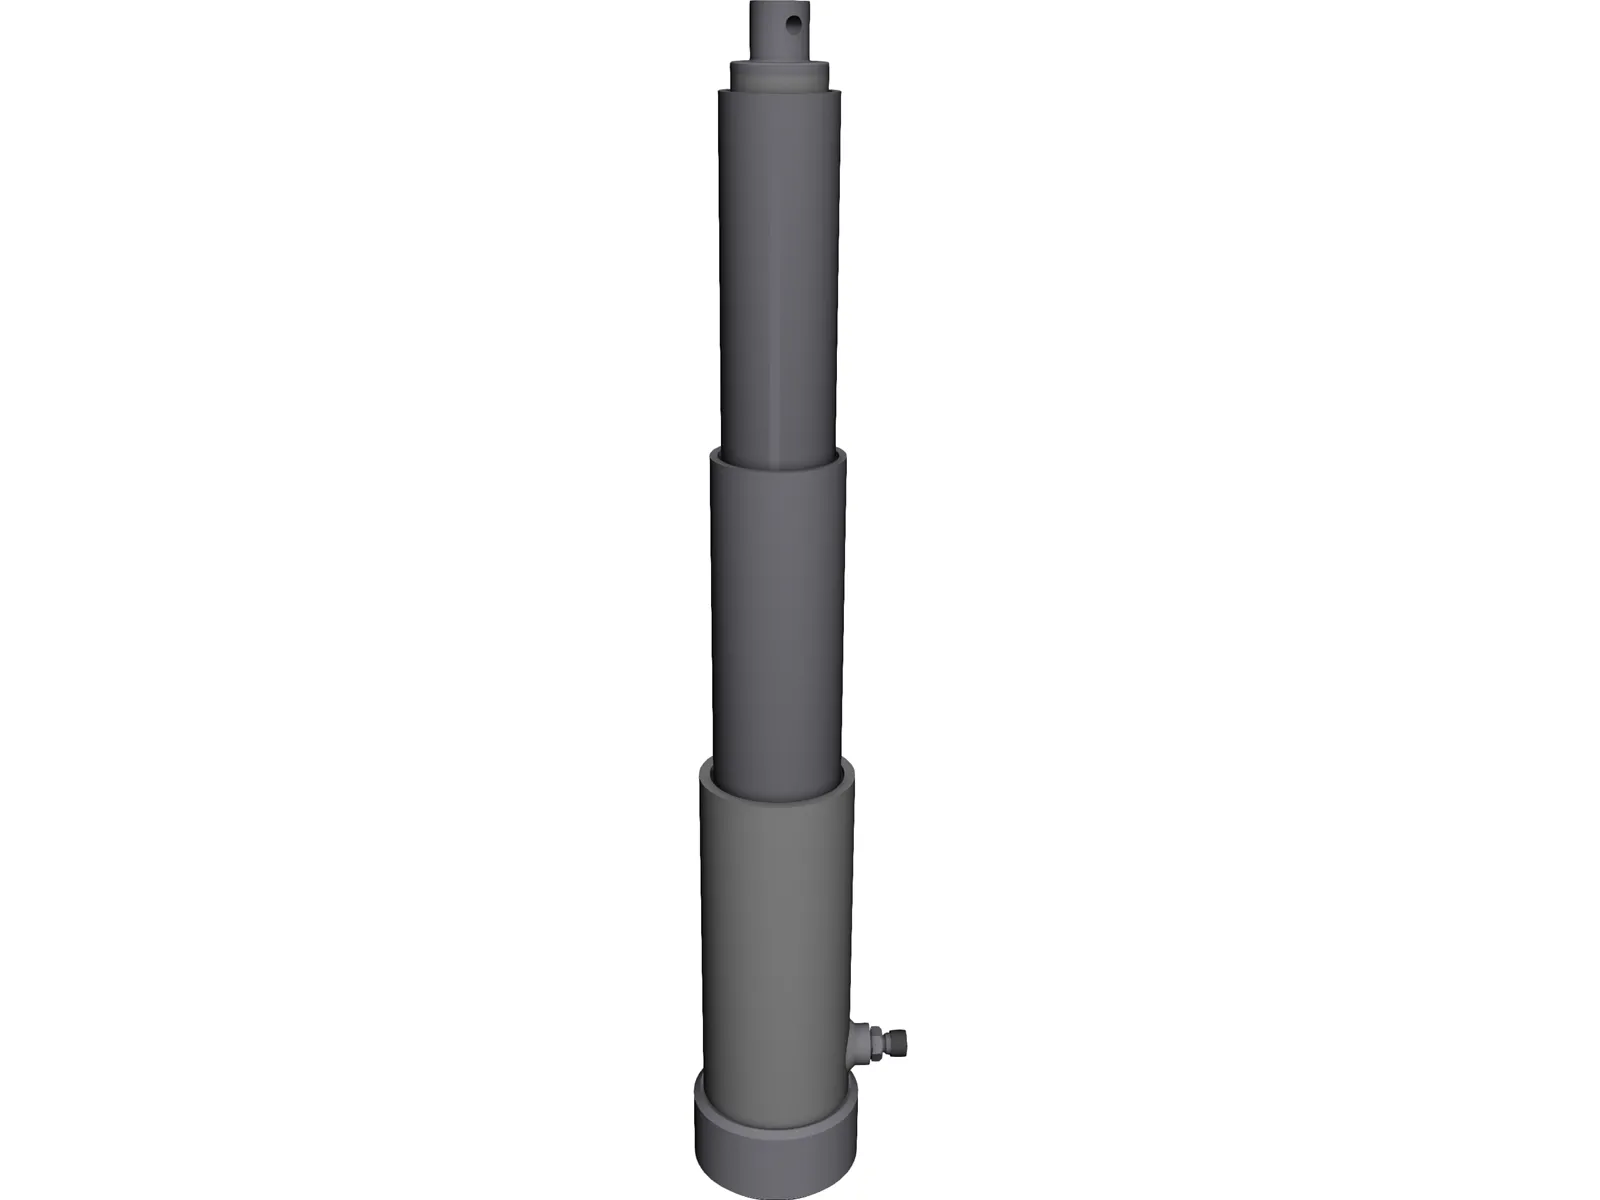 3d Cad File Of Telescopic Tubing